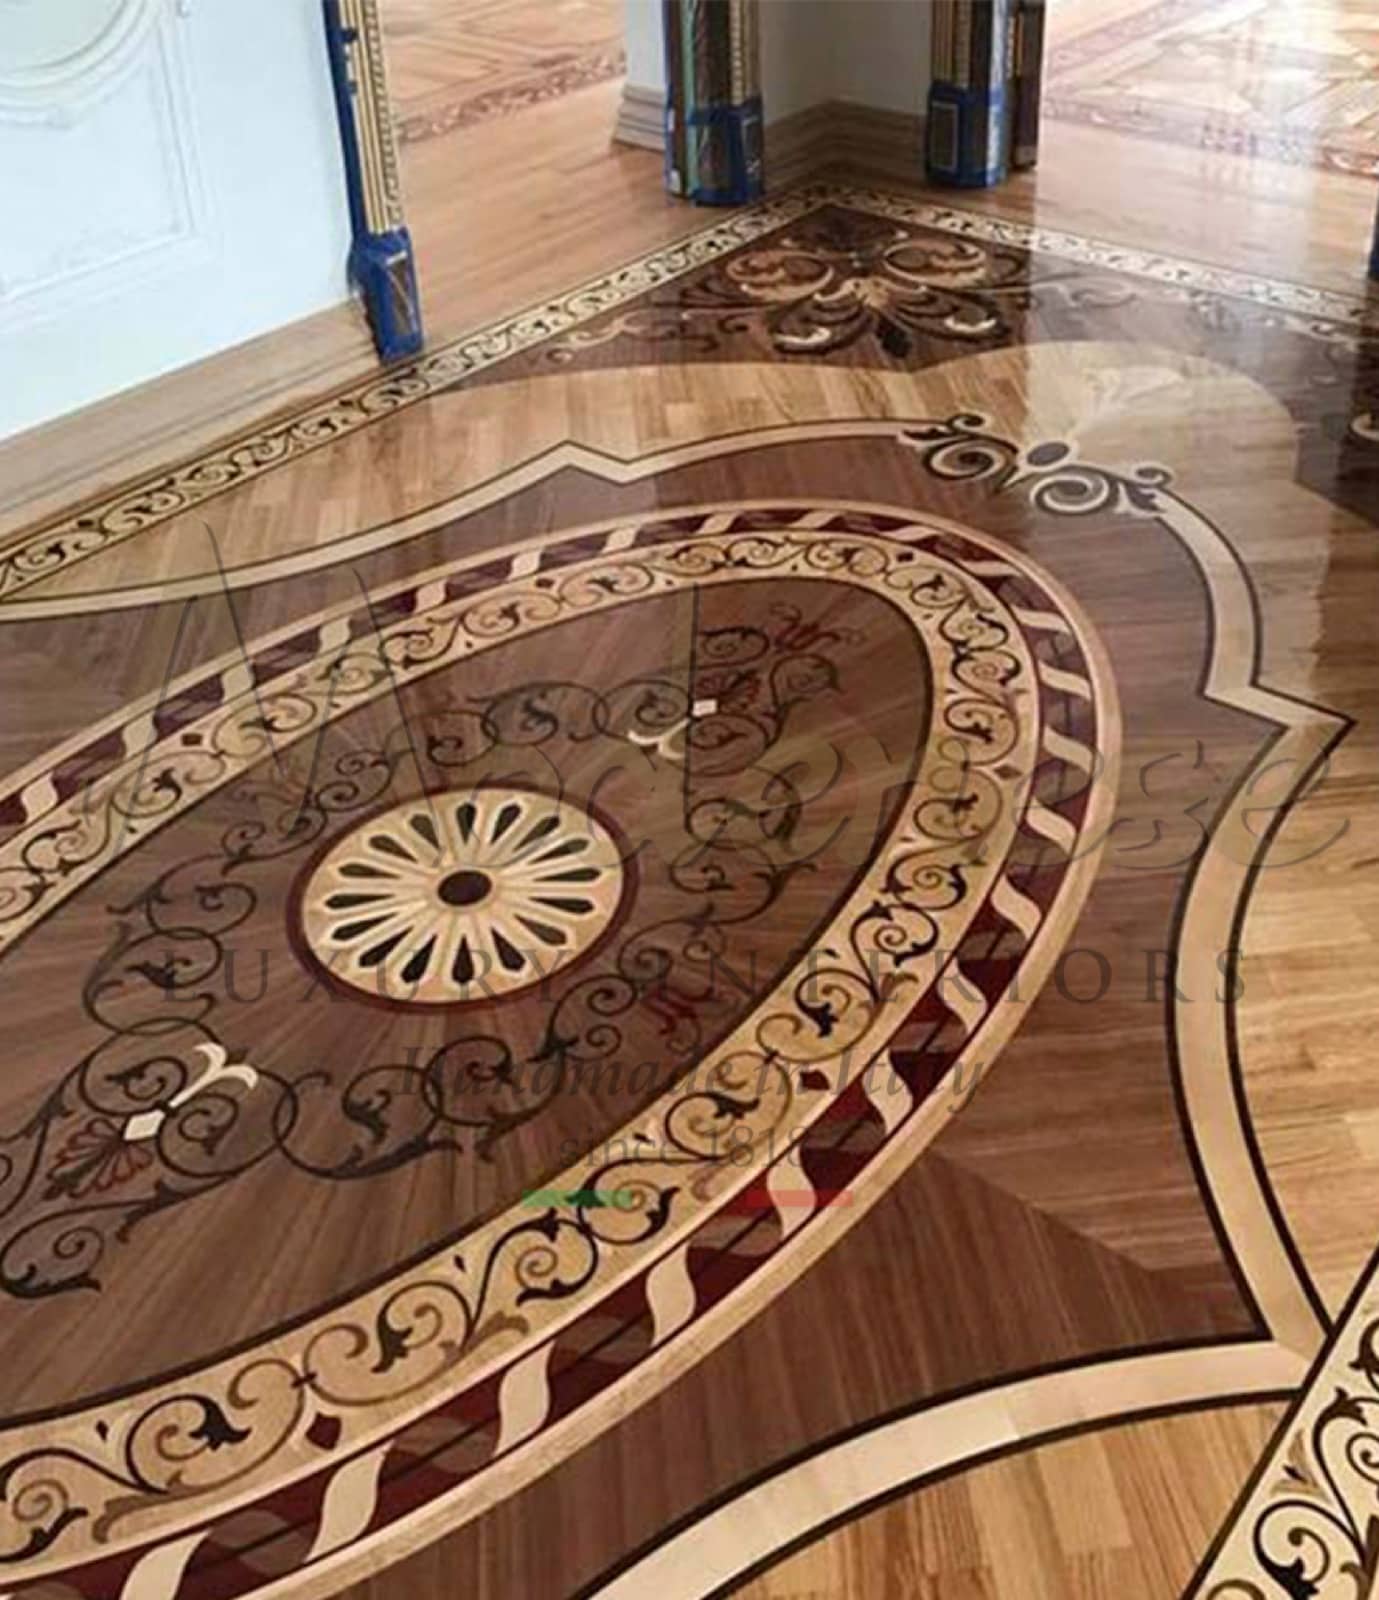 customized parquet made in Italy handmade floor best quality materials home decoration special inlay design Italian ideas interior design studio layout project inlayed solid wood floors designs inlays